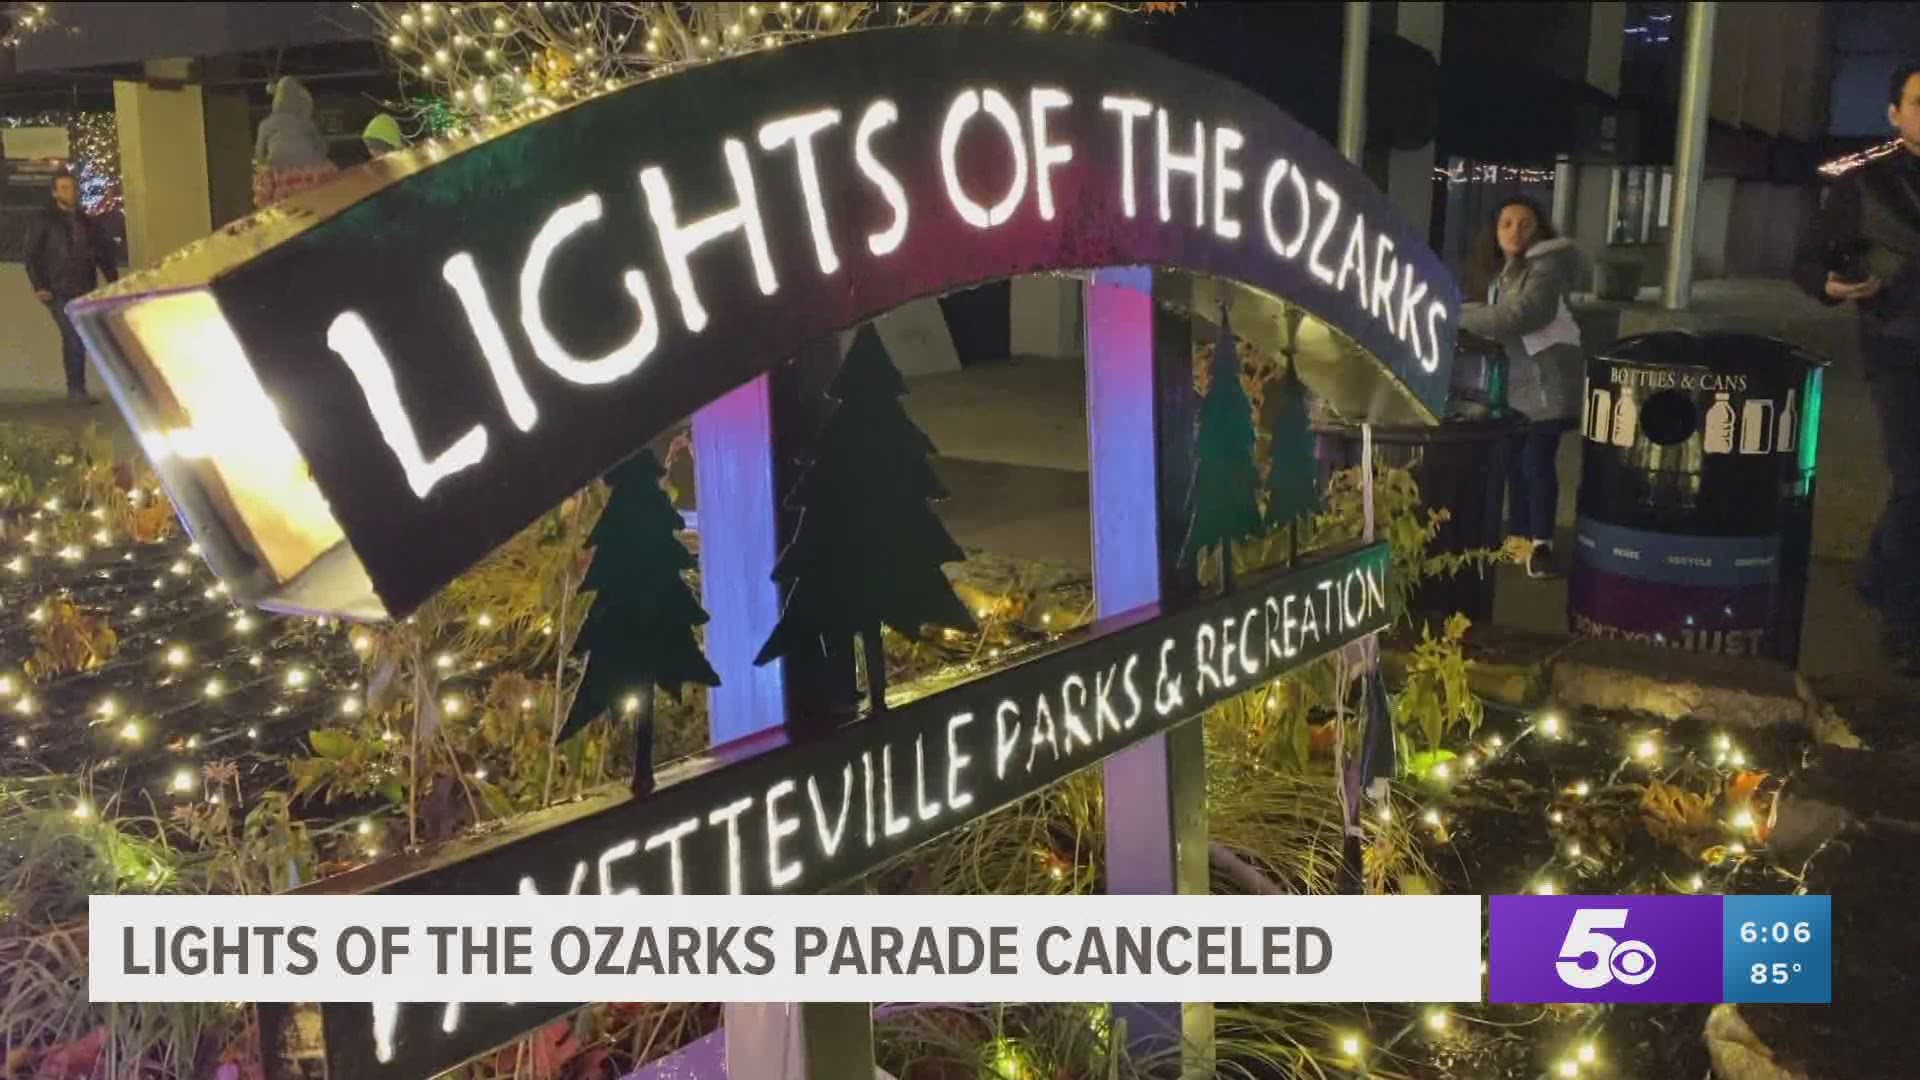 To help prevent the spread of COVID-19, Experience Fayetteville has decided to cancel the Lights of the Ozarks parade in 2020. https://bit.ly/35E5tGi